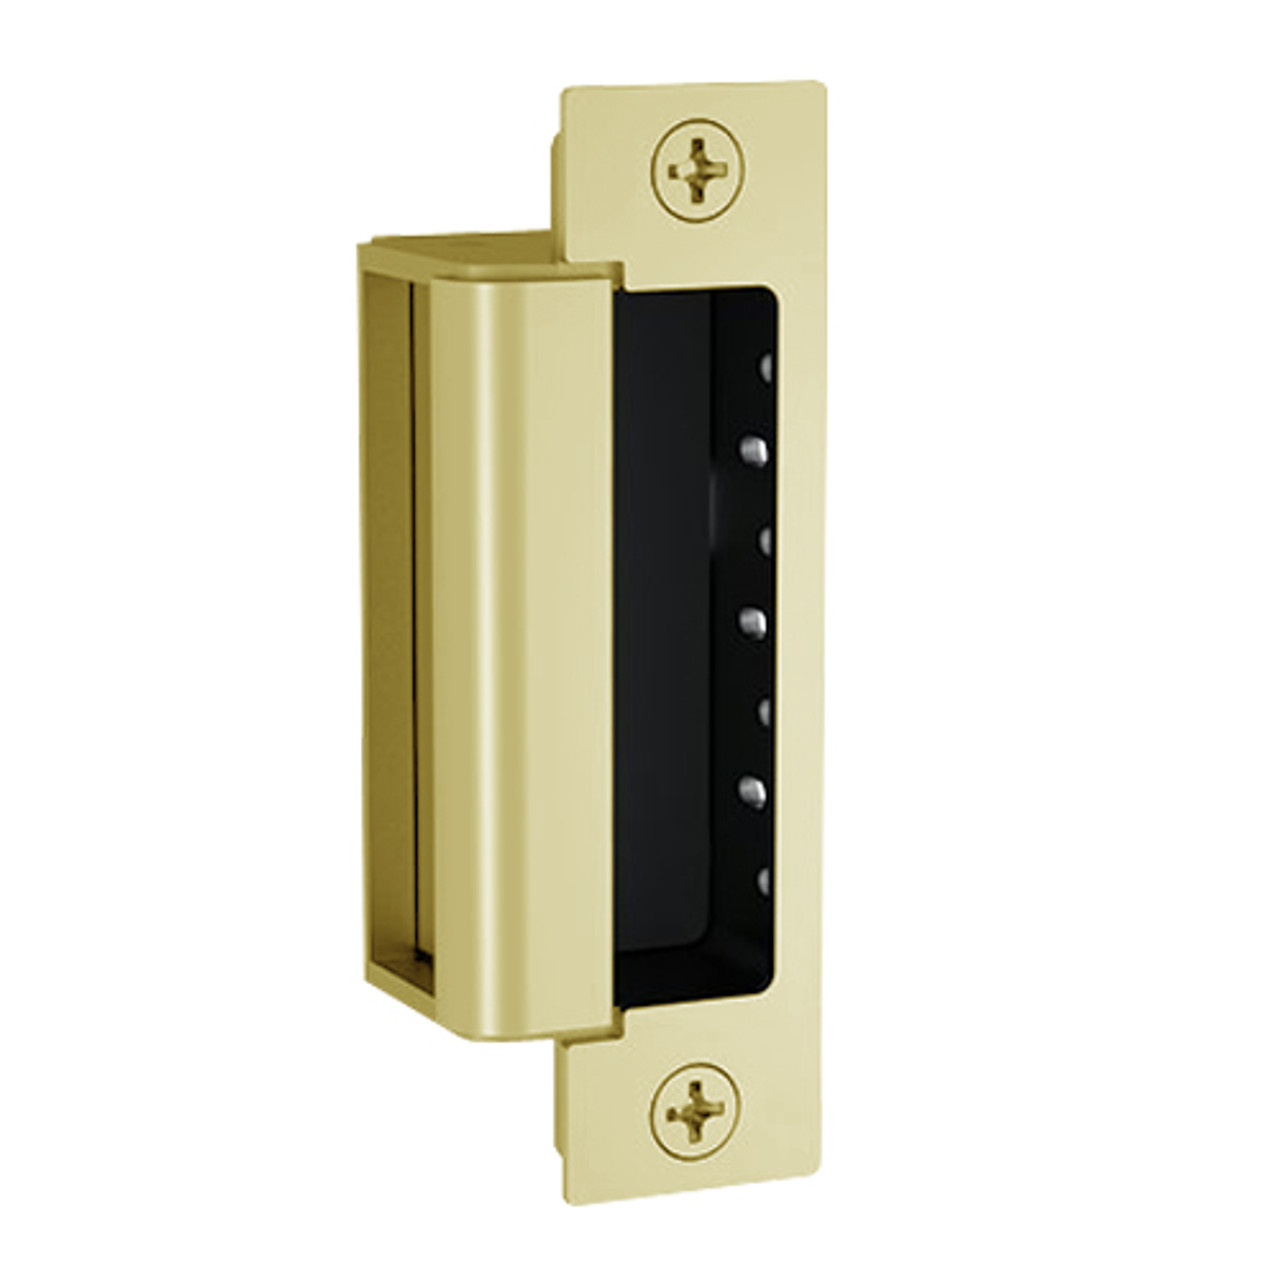 1600-CS-DLMS-606 Hes 1600 Series Dynamic Complete Low Profile Electric Strike for Latchbolt and Deadbolt Lock with Dual Lock Monitor & Strike Monitor in Satin Brass